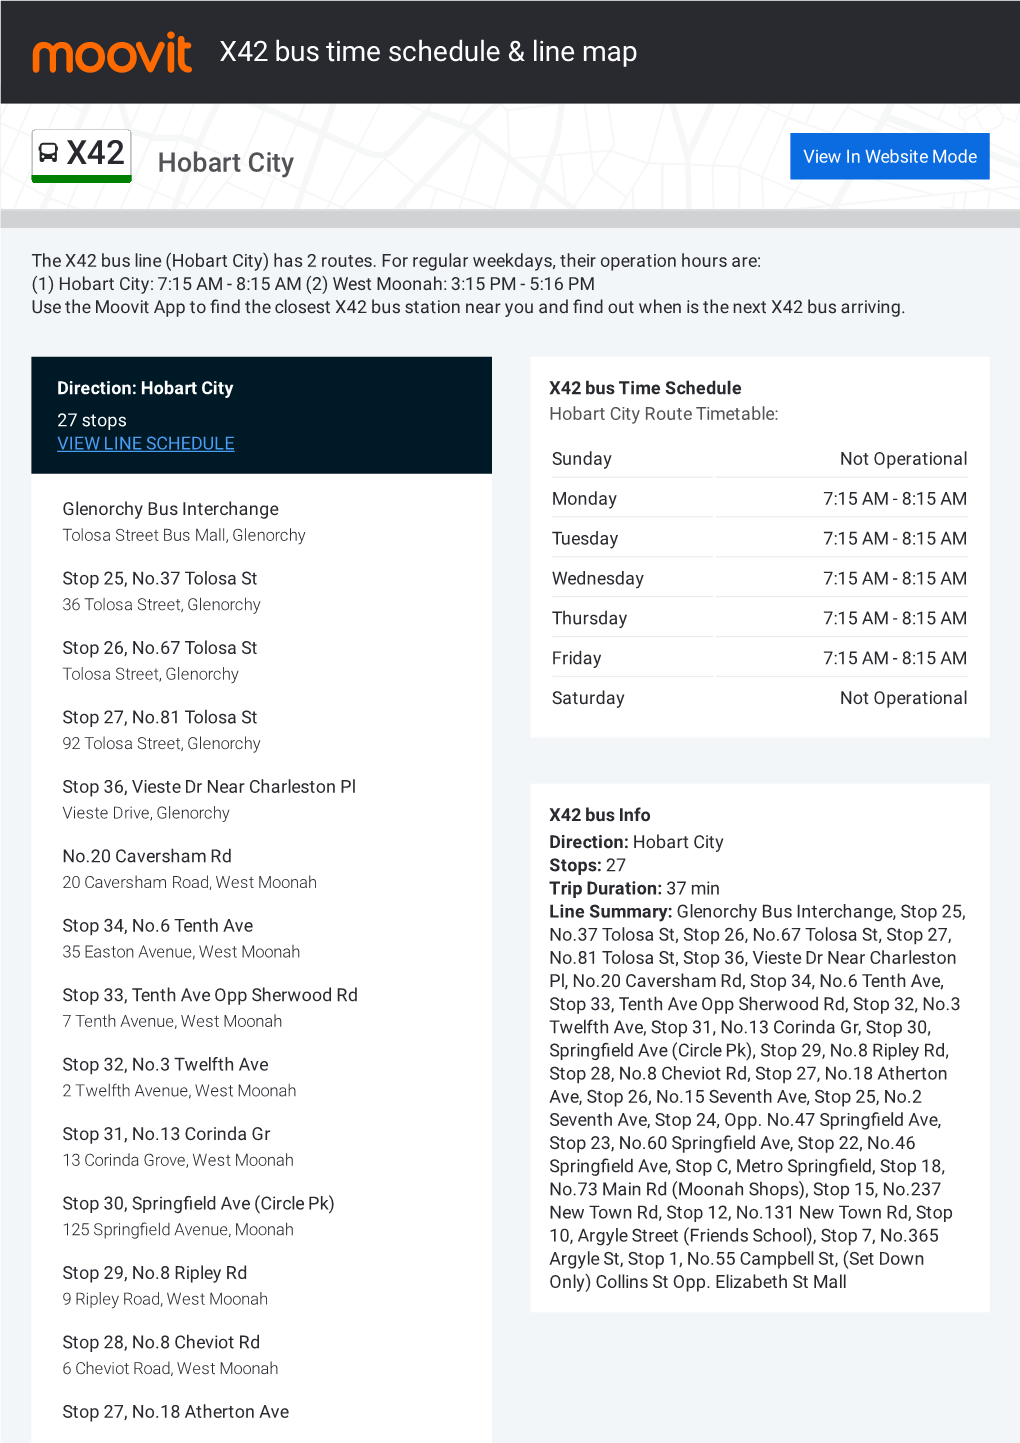 X42 Bus Time Schedule & Line Route